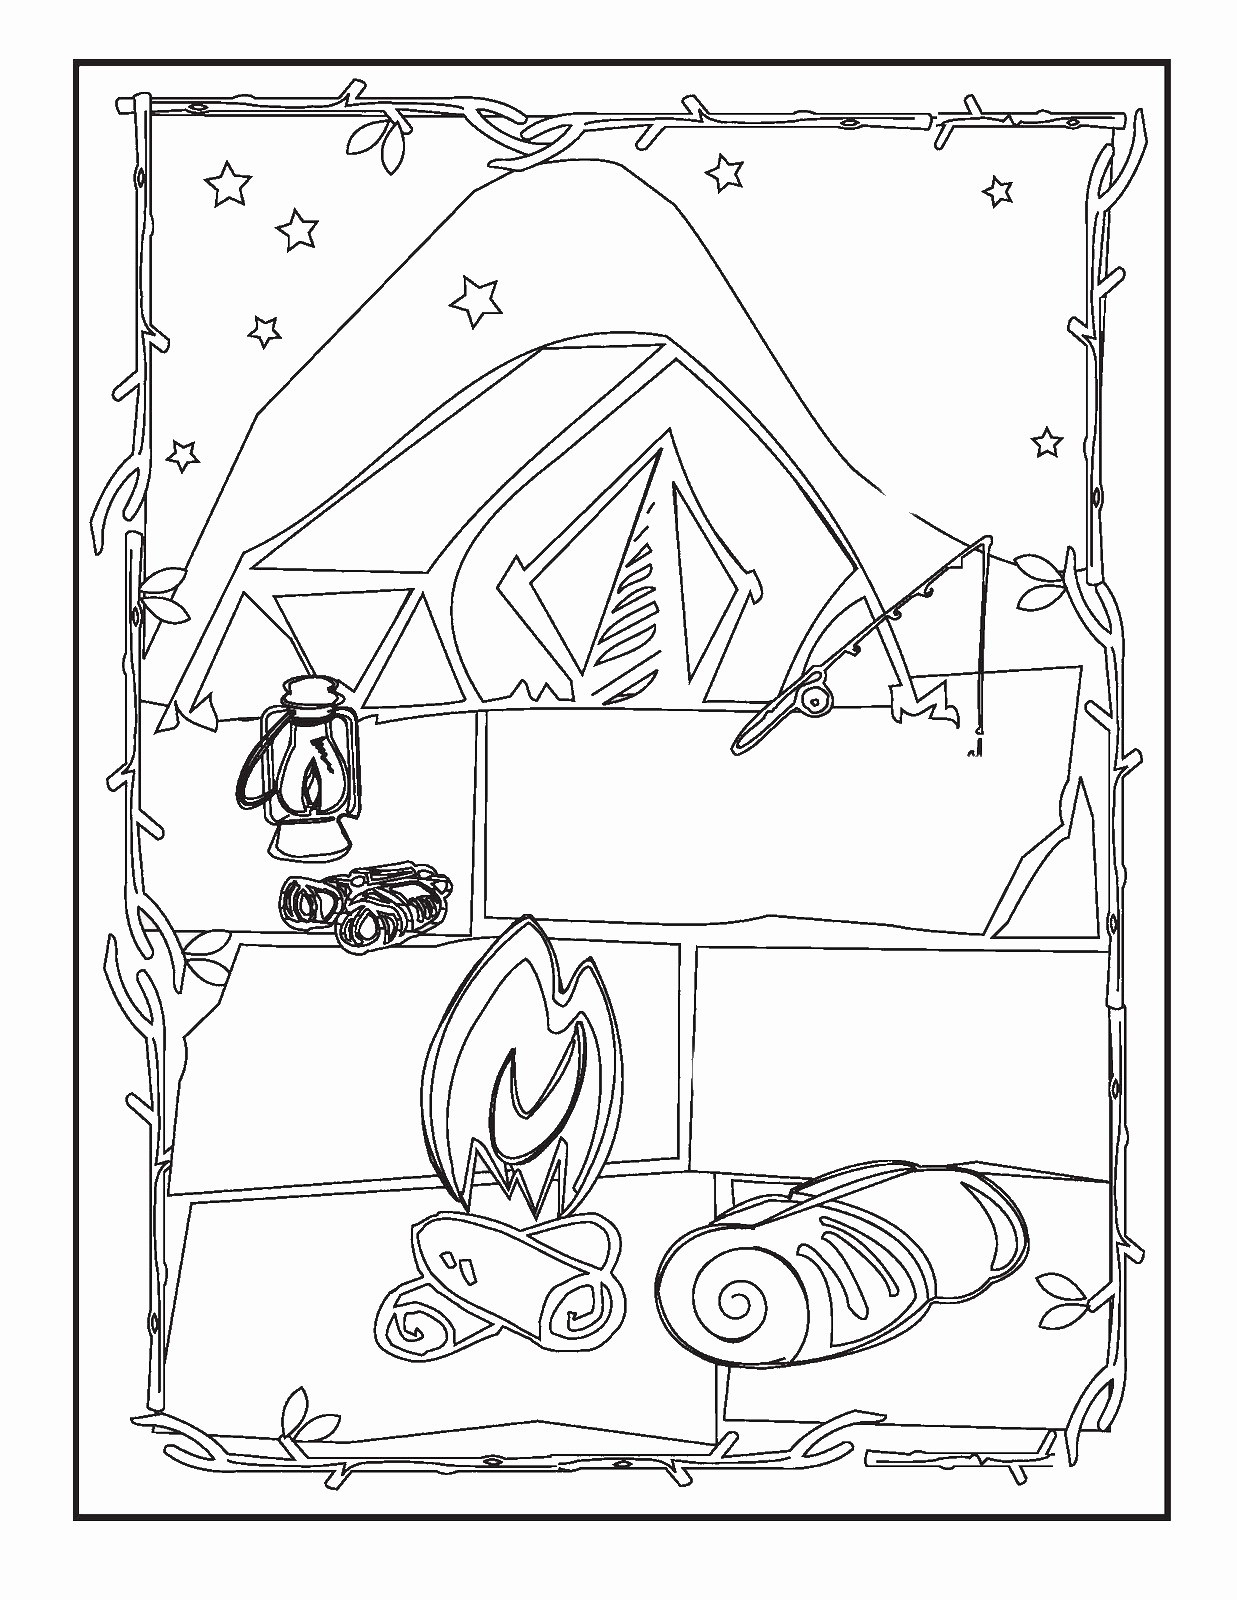 Camping Coloring Pages To Print
 Camping Coloring Pages